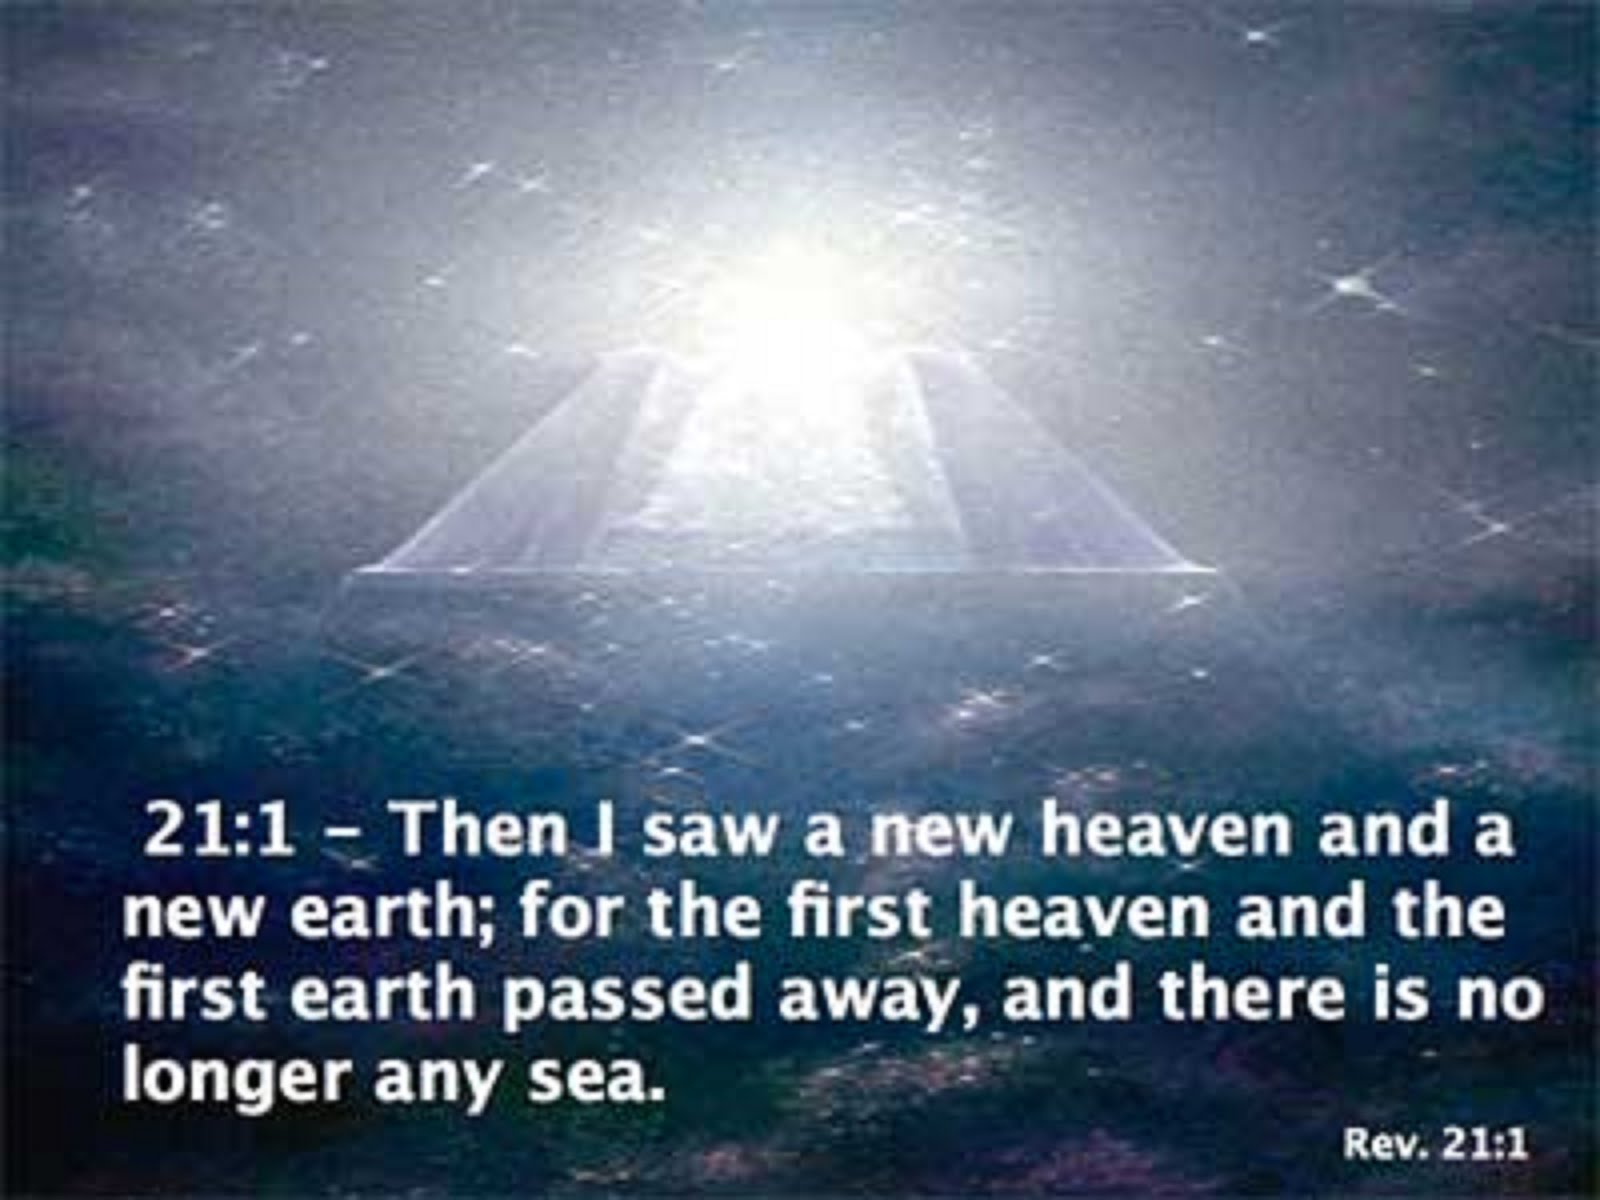 THEN I SAW A NEW HEAVEN AND A NEW EARTH